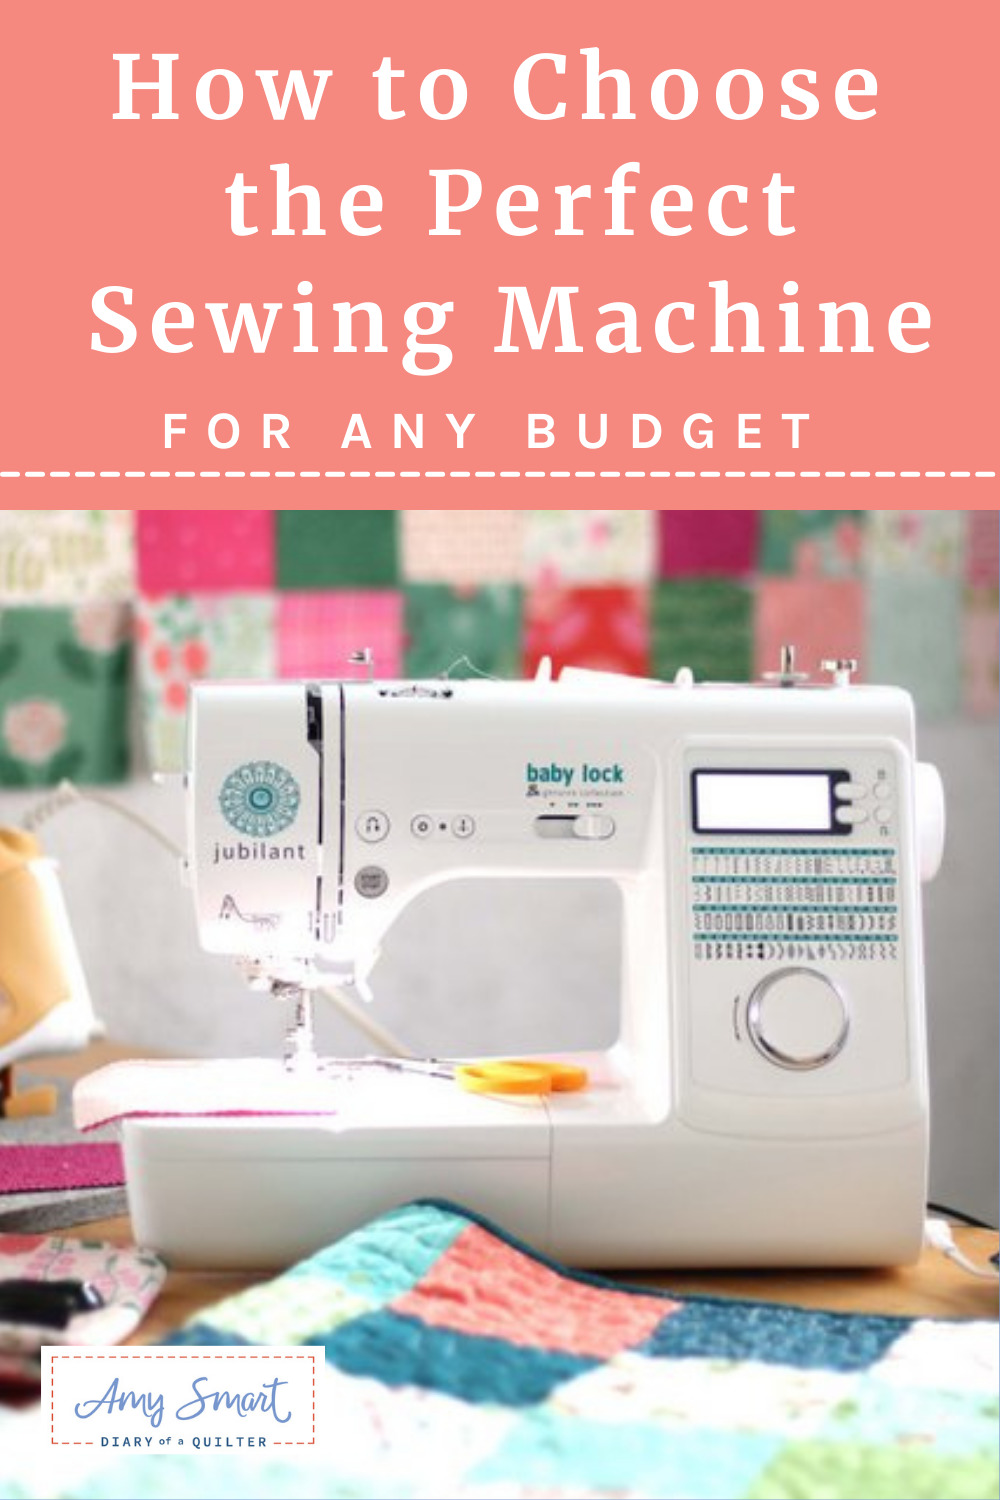 Sewing Machine Basics Workshop: IN PERSON OR ZOOM OPTIONS